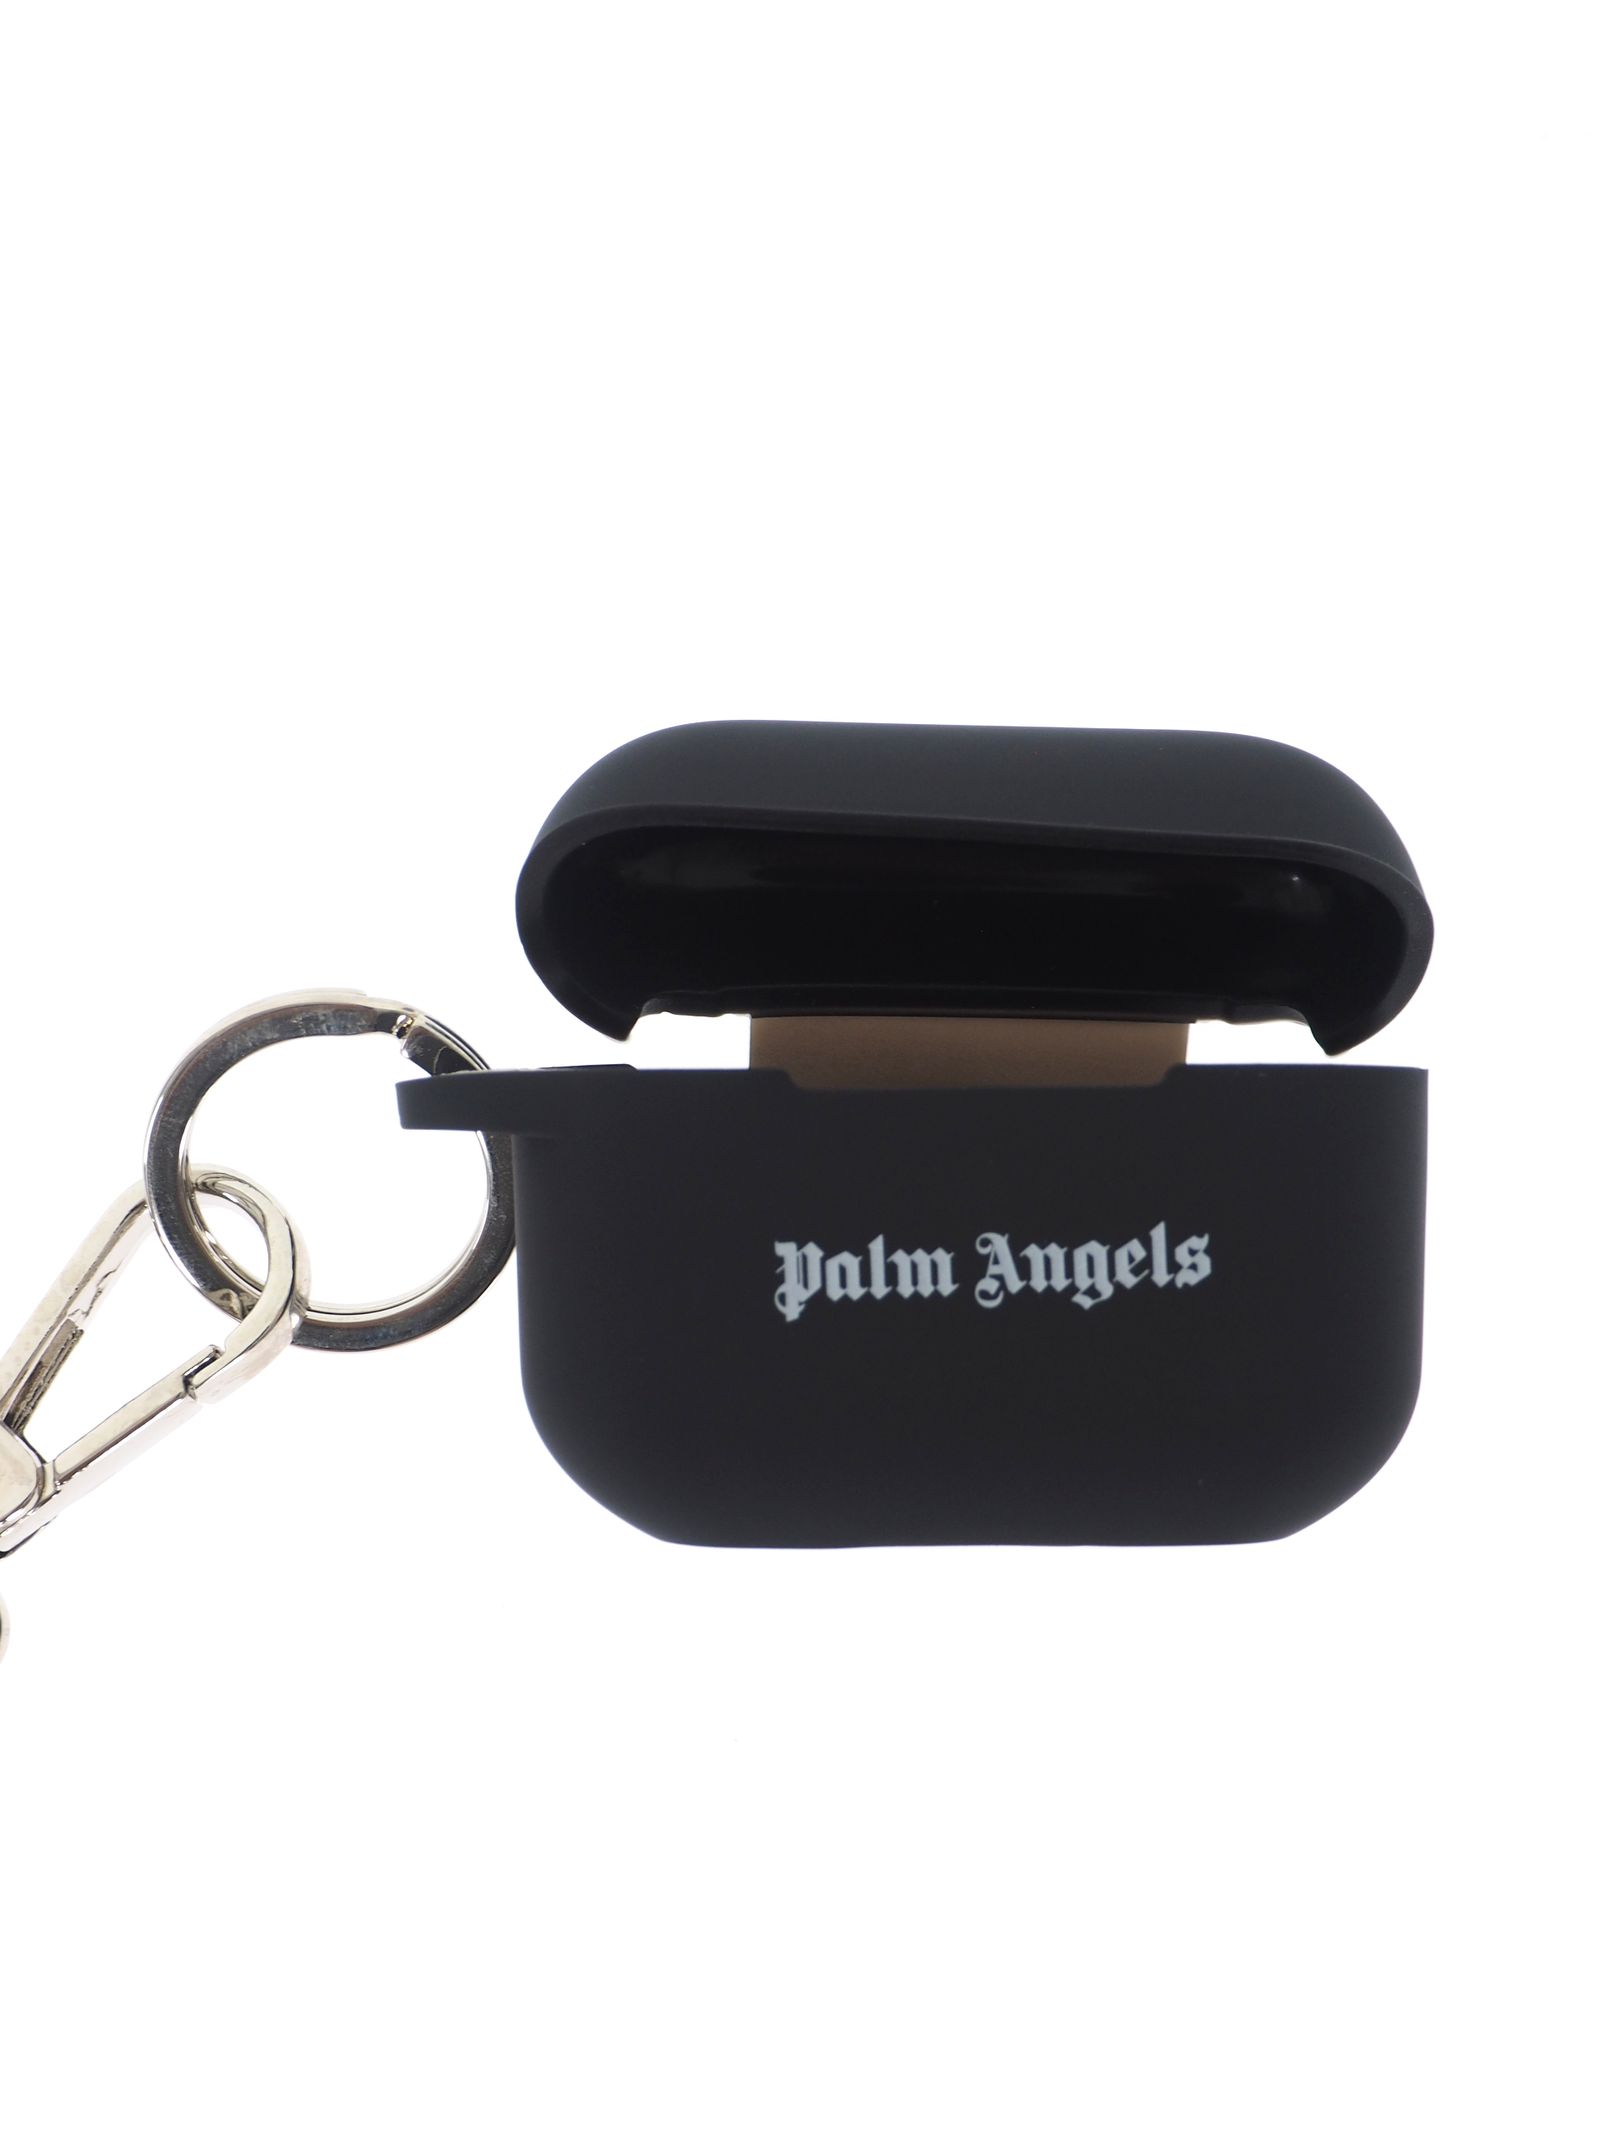 PALM ANGELS - 【先行予約】 ロゴ エアーポッズケース LOGO AIRPODS 